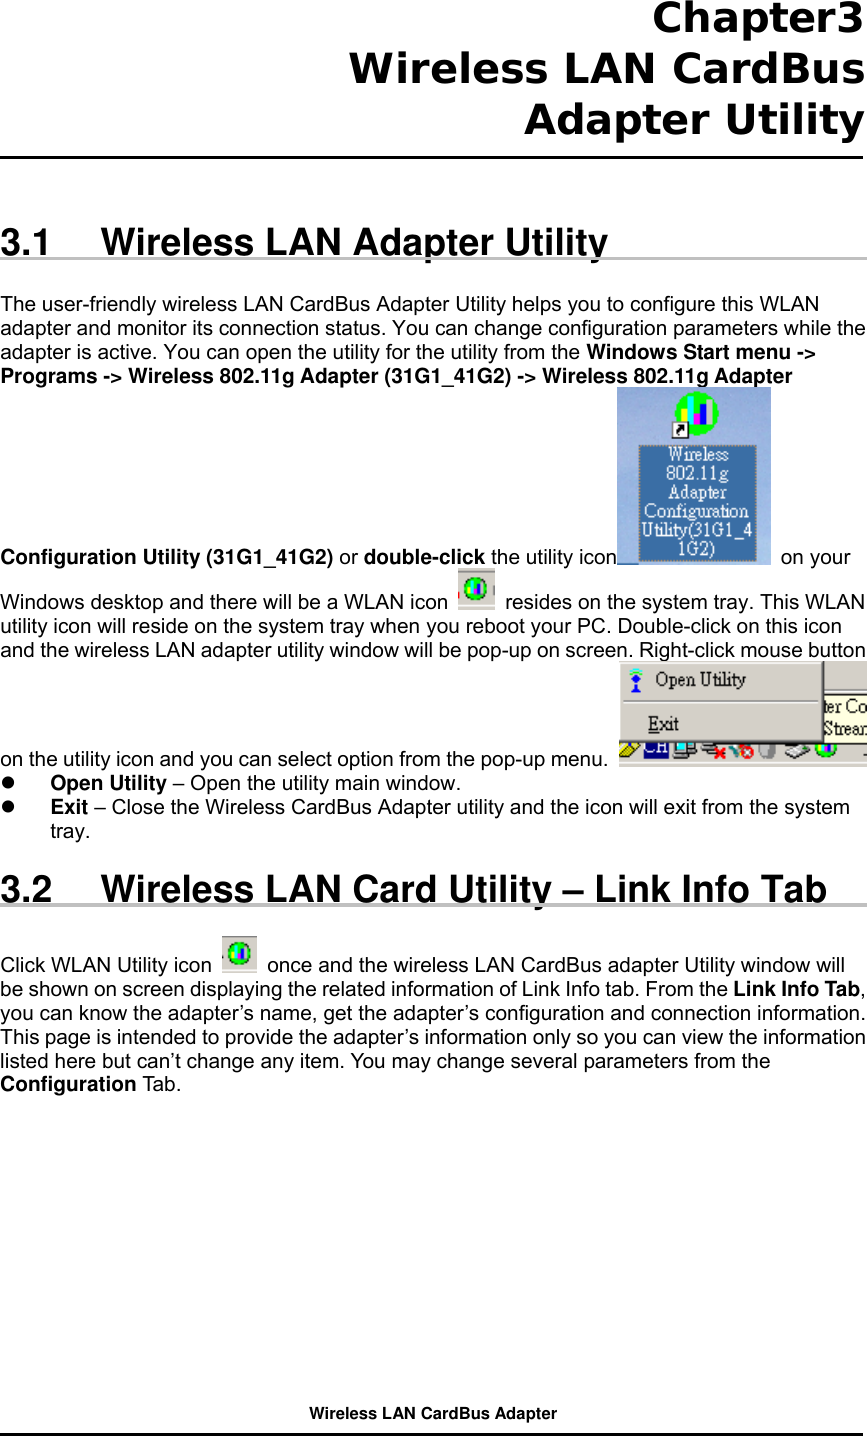  Chapter3  Wireless LAN CardBus Adapter Utility    3.1  Wireless LAN Adapter Utility  The user-friendly wireless LAN CardBus Adapter Utility helps you to configure this WLAN adapter and monitor its connection status. You can change configuration parameters while the adapter is active. You can open the utility for the utility from the Windows Start menu -&gt; Programs -&gt; Wireless 802.11g Adapter (31G1_41G2) -&gt; Wireless 802.11g Adapter Configuration Utility (31G1_41G2) or double-click the utility icon  on your Windows desktop and there will be a WLAN icon    resides on the system tray. This WLAN utility icon will reside on the system tray when you reboot your PC. Double-click on this icon and the wireless LAN adapter utility window will be pop-up on screen. Right-click mouse button on the utility icon and you can select option from the pop-up menu.      Open Utility – Open the utility main window.     Exit – Close the Wireless CardBus Adapter utility and the icon will exit from the system tray.  3.2  Wireless LAN Card Utility – Link Info Tab  Click WLAN Utility icon    once and the wireless LAN CardBus adapter Utility window will be shown on screen displaying the related information of Link Info tab. From the Link Info Tab, you can know the adapter’s name, get the adapter’s configuration and connection information. This page is intended to provide the adapter’s information only so you can view the information listed here but can’t change any item. You may change several parameters from the Configuration Tab.  Wireless LAN CardBus Adapter 